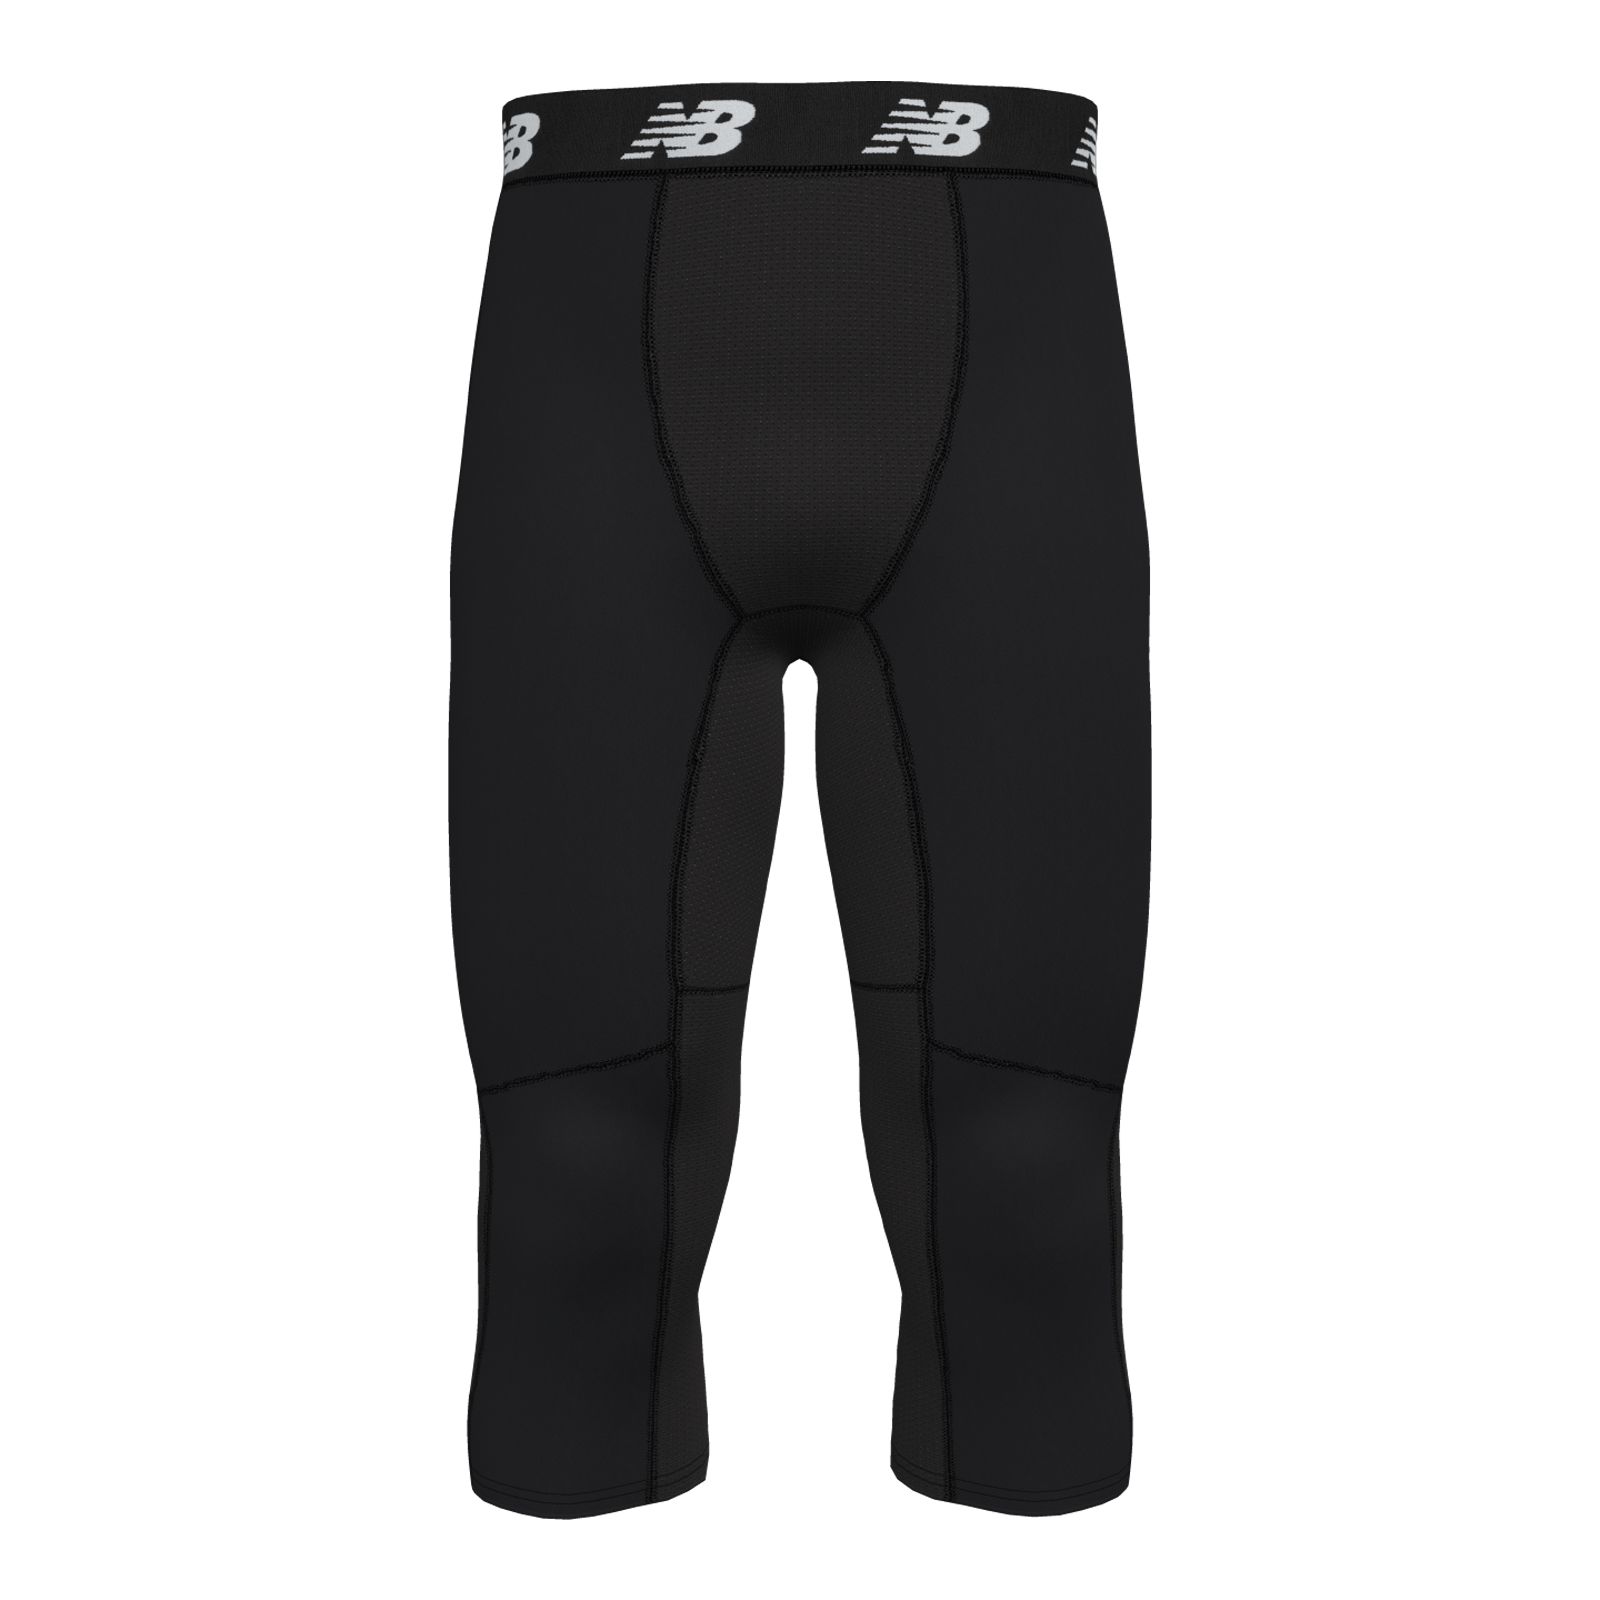 Basketball Leggings With Knee Pad For Men 3/4 Compression Trousers Sports  Trousers Multi-way